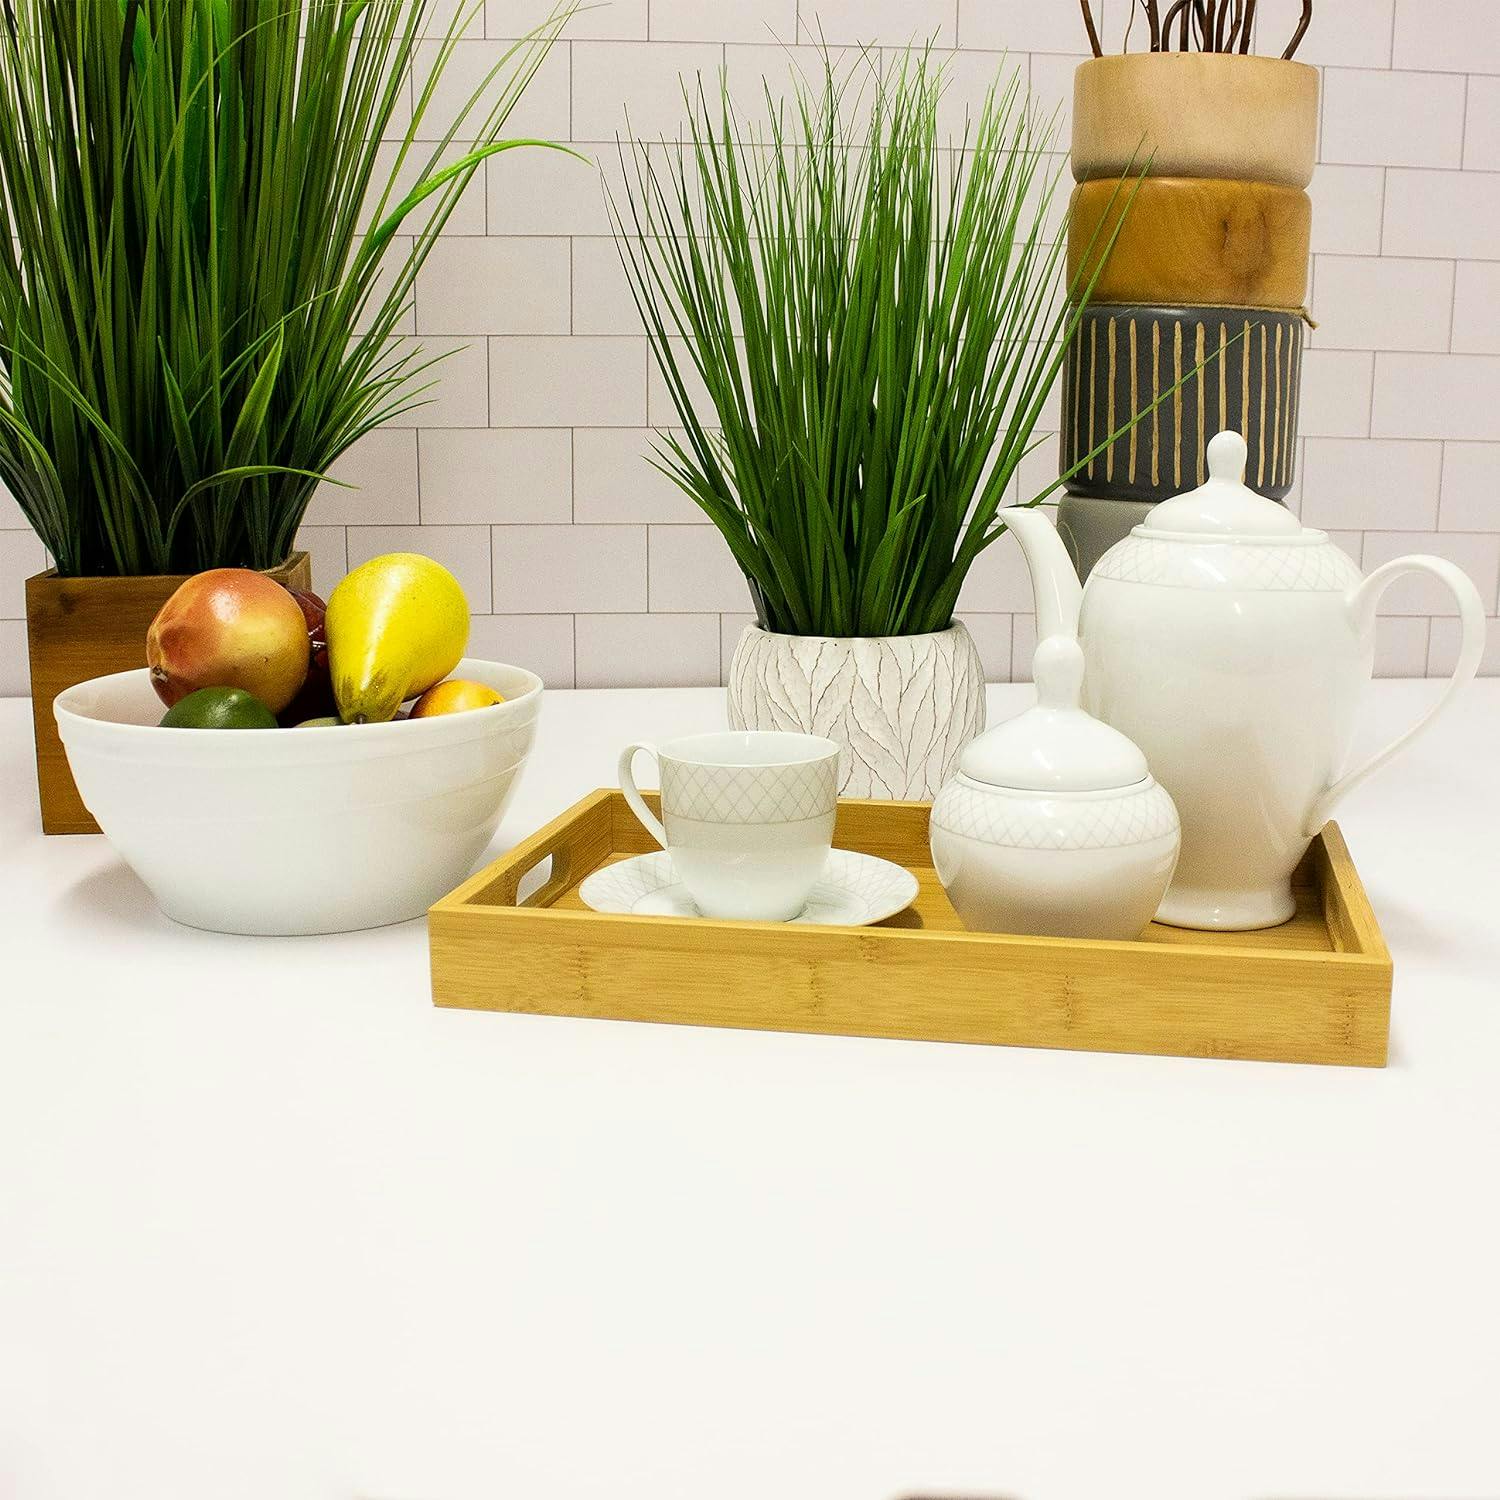 Eco-Friendly Bamboo Serving Tray 14.5" x 9.5"